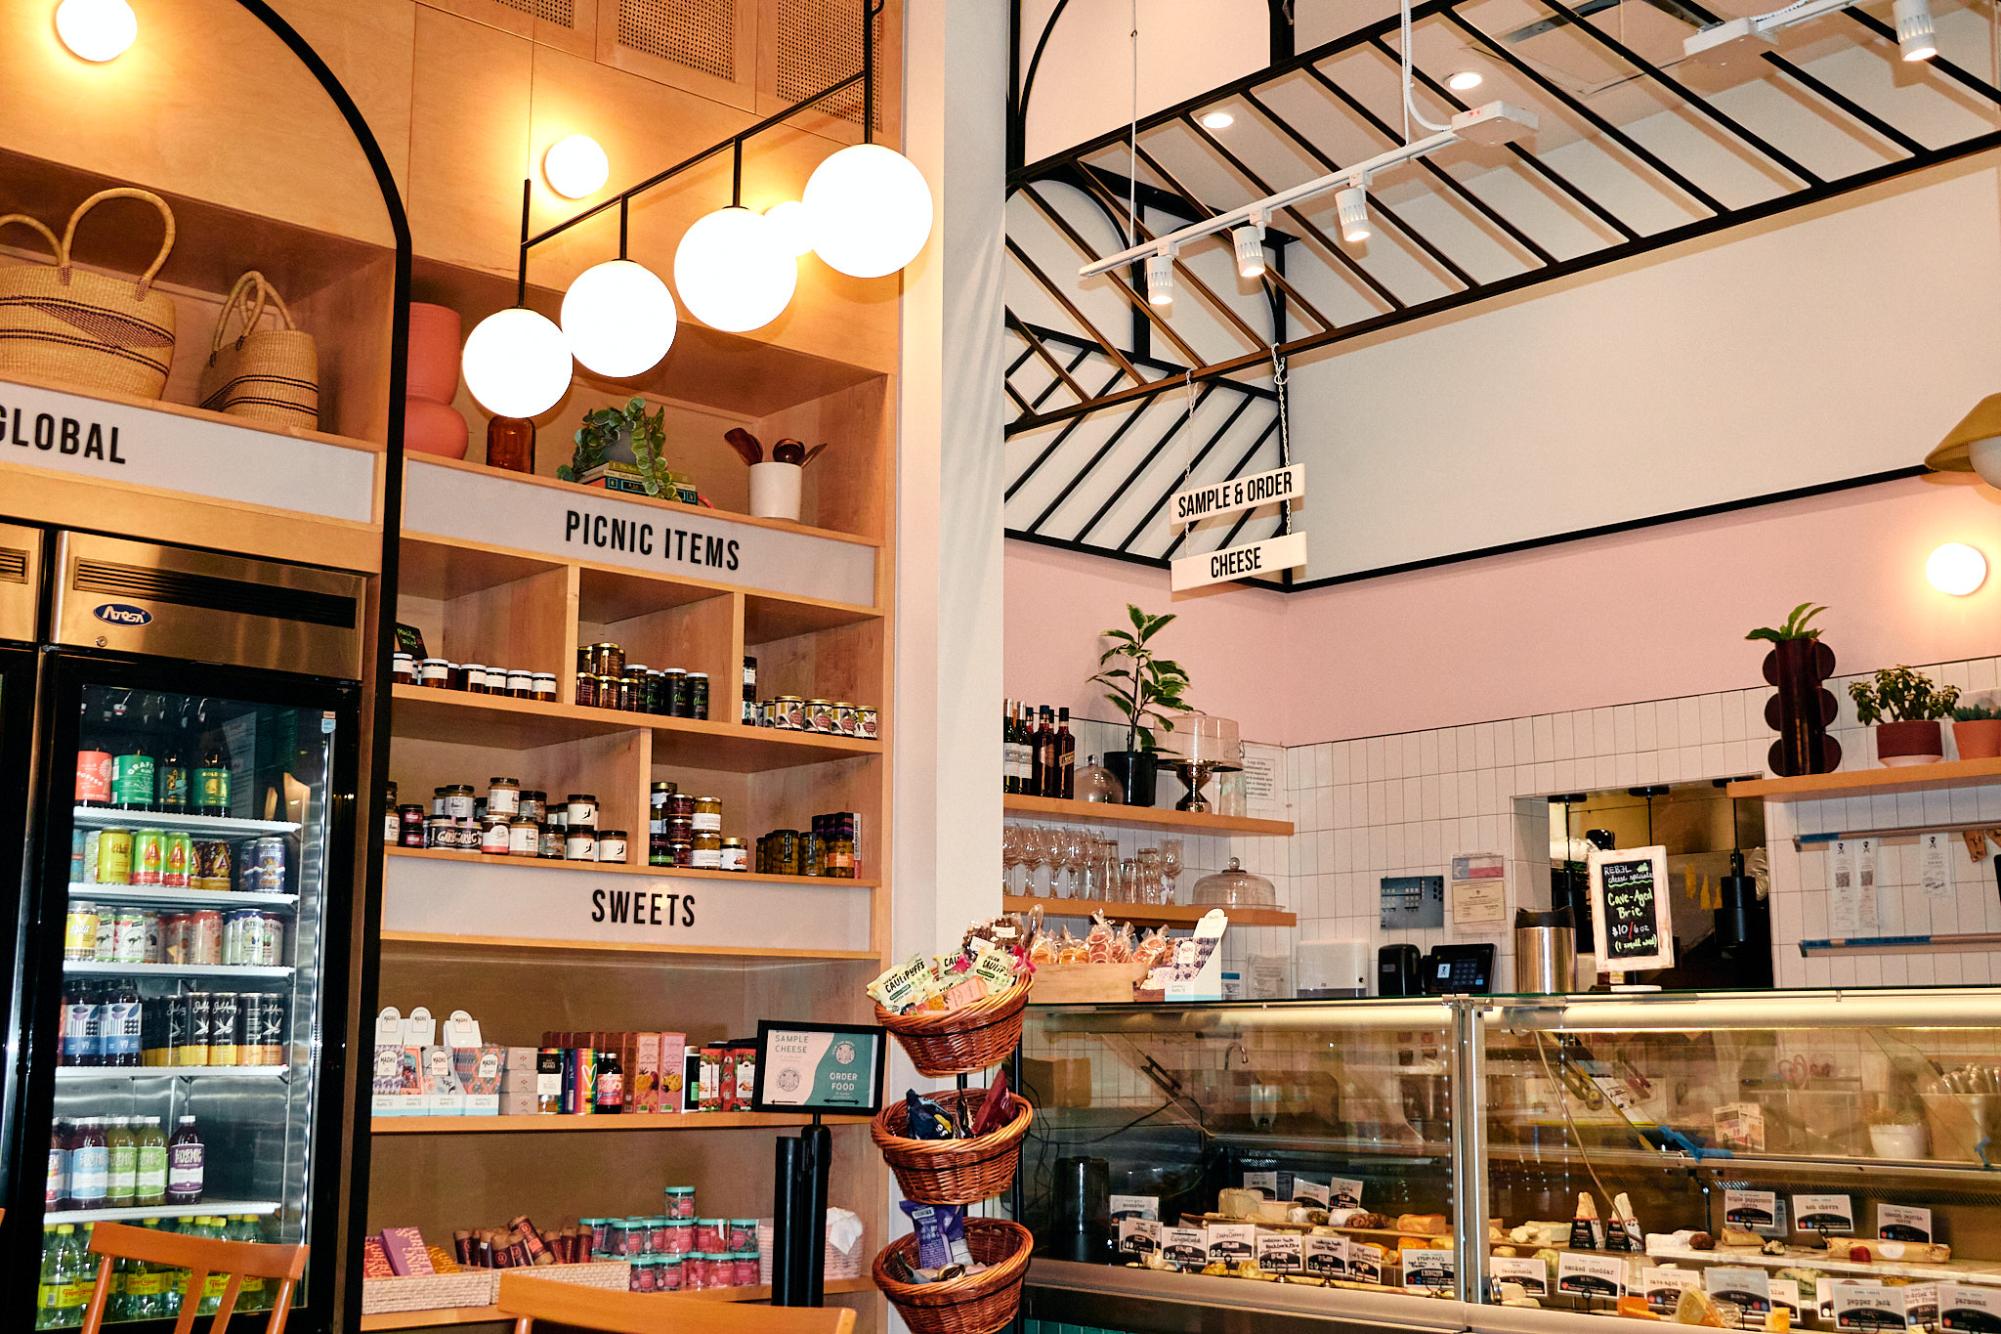 Rebel Cheese offers an aesthetically pleasing ambiance with their large assortment of vegan products and cheeses on display.